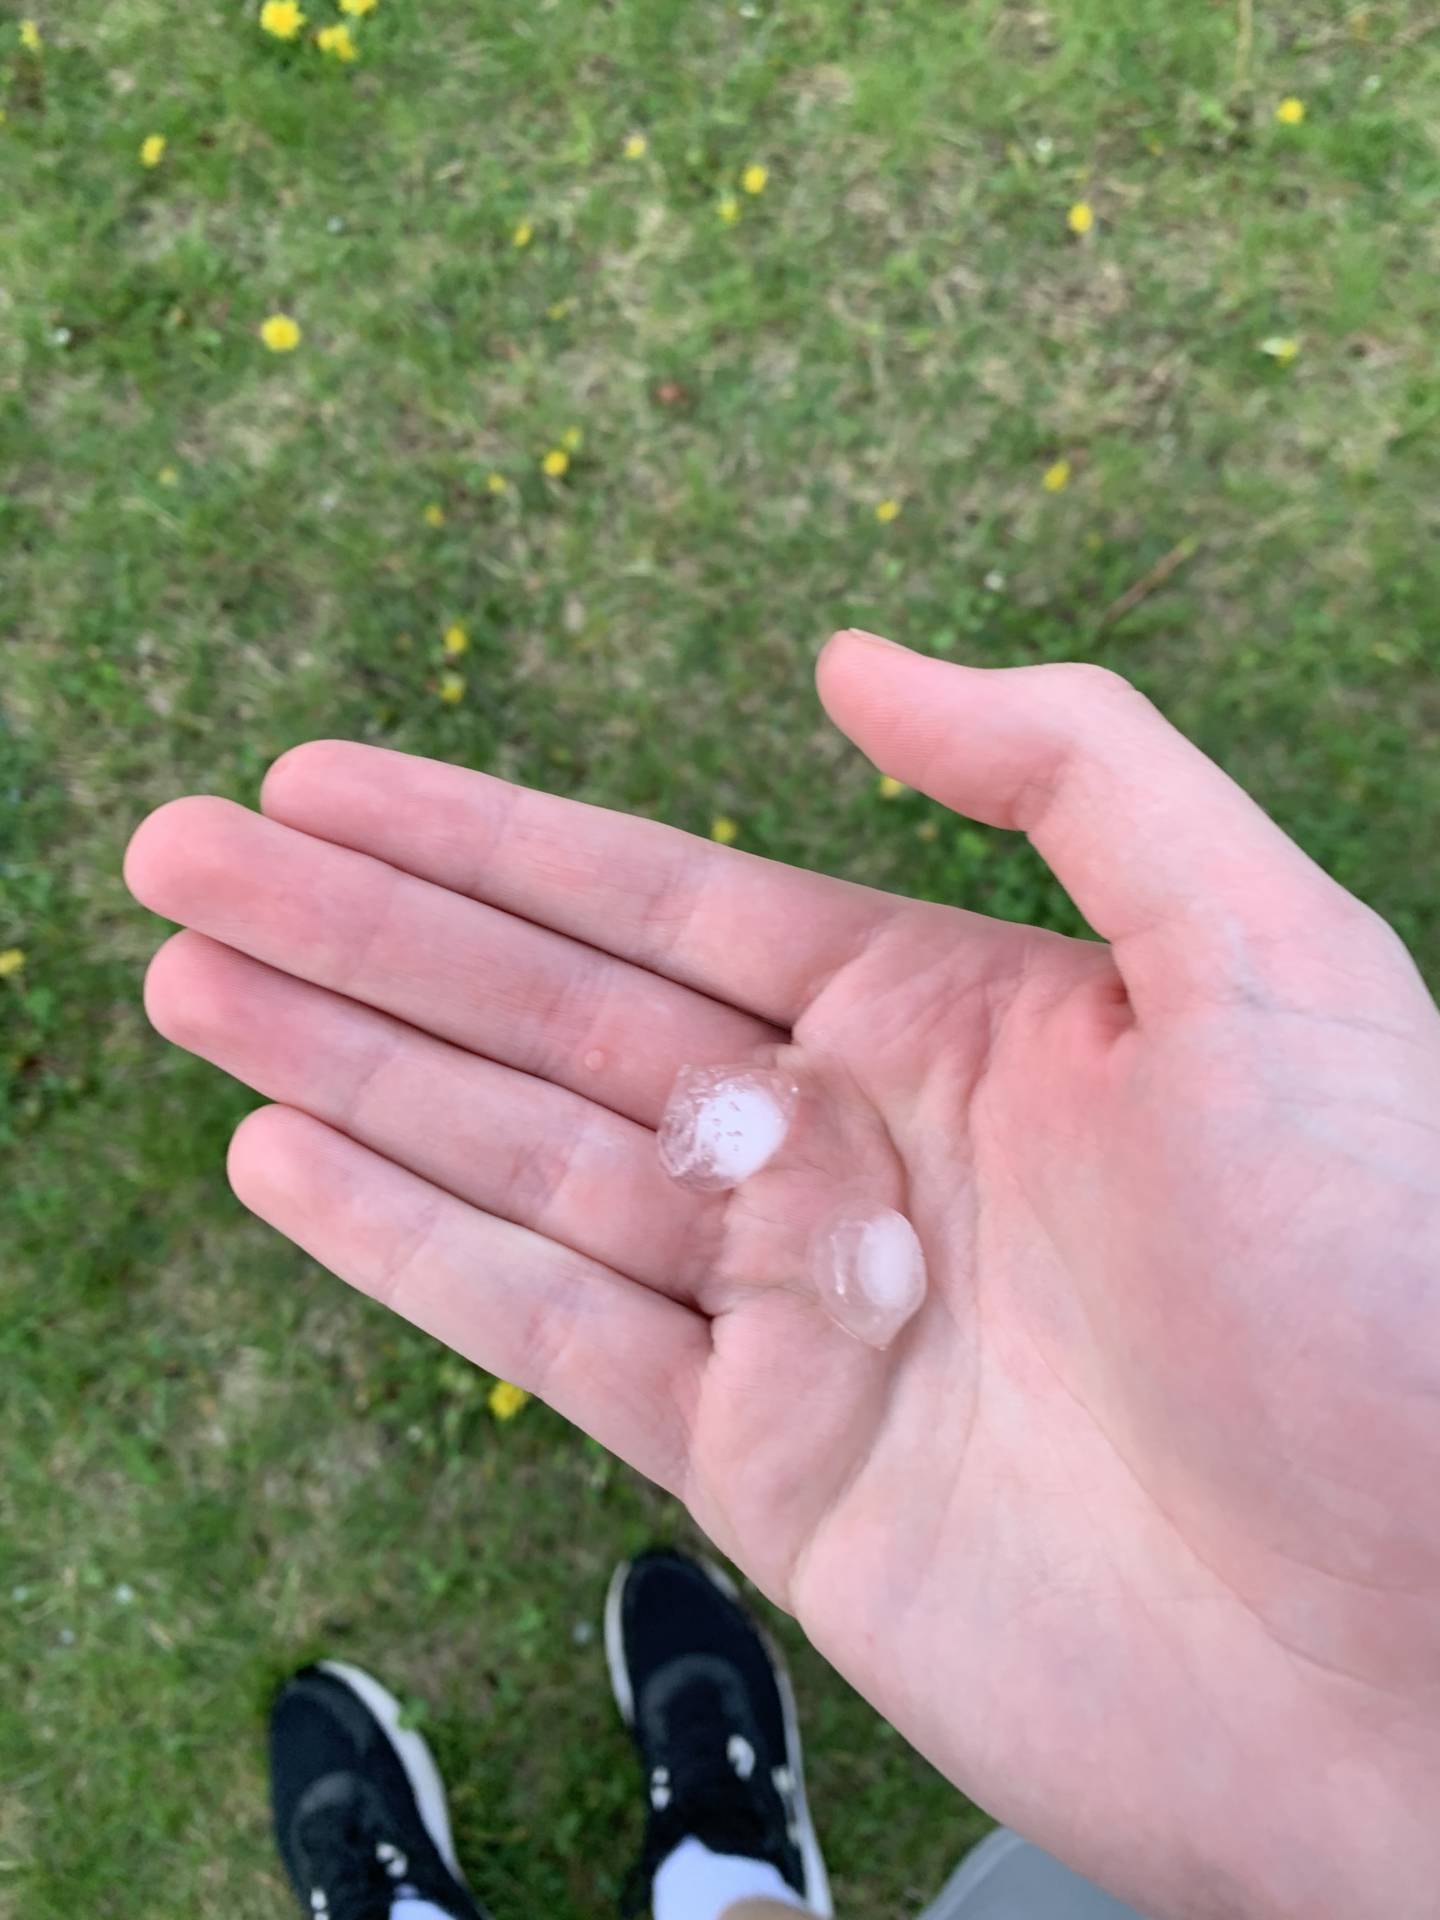 nice hail that fell. Probably dime to nickel here, but this was from 40 minutes after the storm. so probably had 1”+ hail.